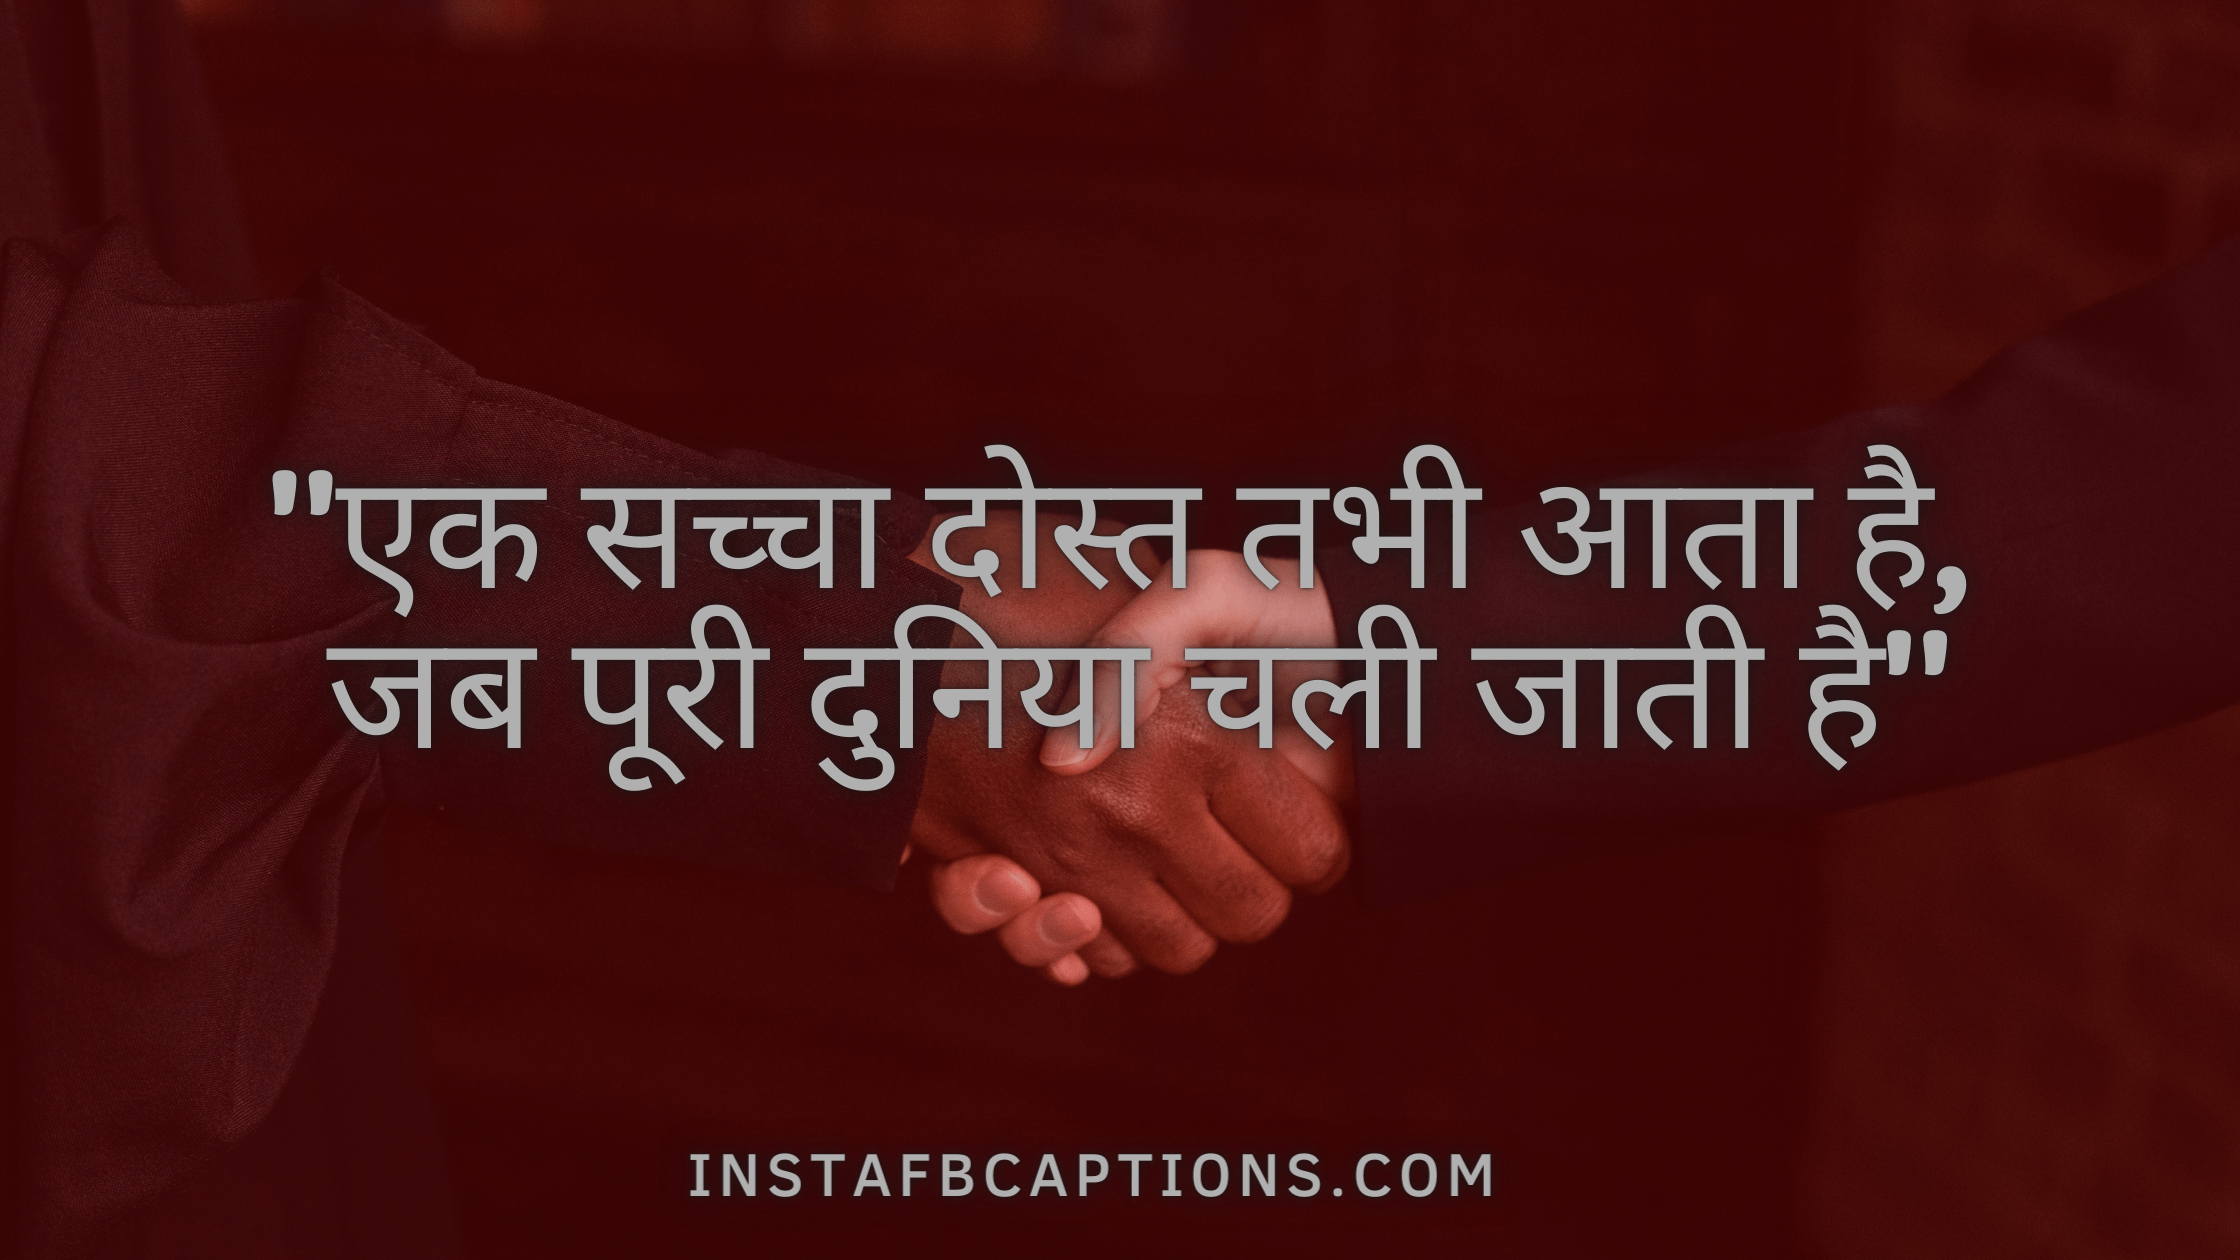 Unbreakable Friendship Bond Quotes In Hindi  - Unbreakable Friendship bond Quotes in Hindi - Unbreakable Friendship Bond Captions for Instagram in 2022